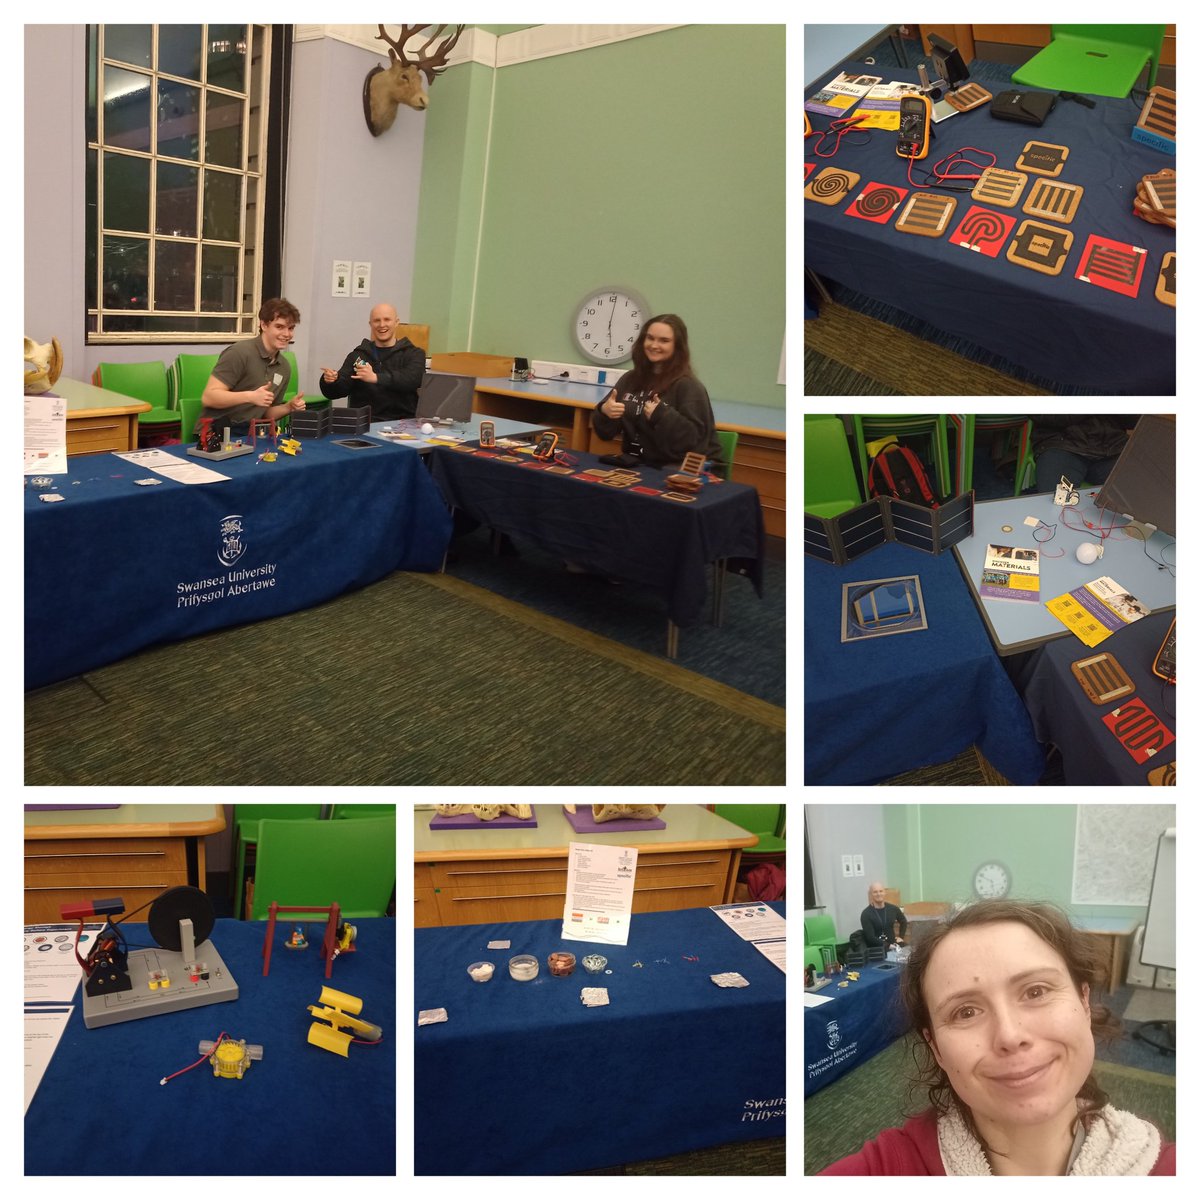 Lots of engagement on the Materials for Sustainable Energy stand last night at the Museum After Dark in the National Museum Cardiff 🌟 Hopefully many children had fun learning about renewable energy and how it can be stored + used in homes.